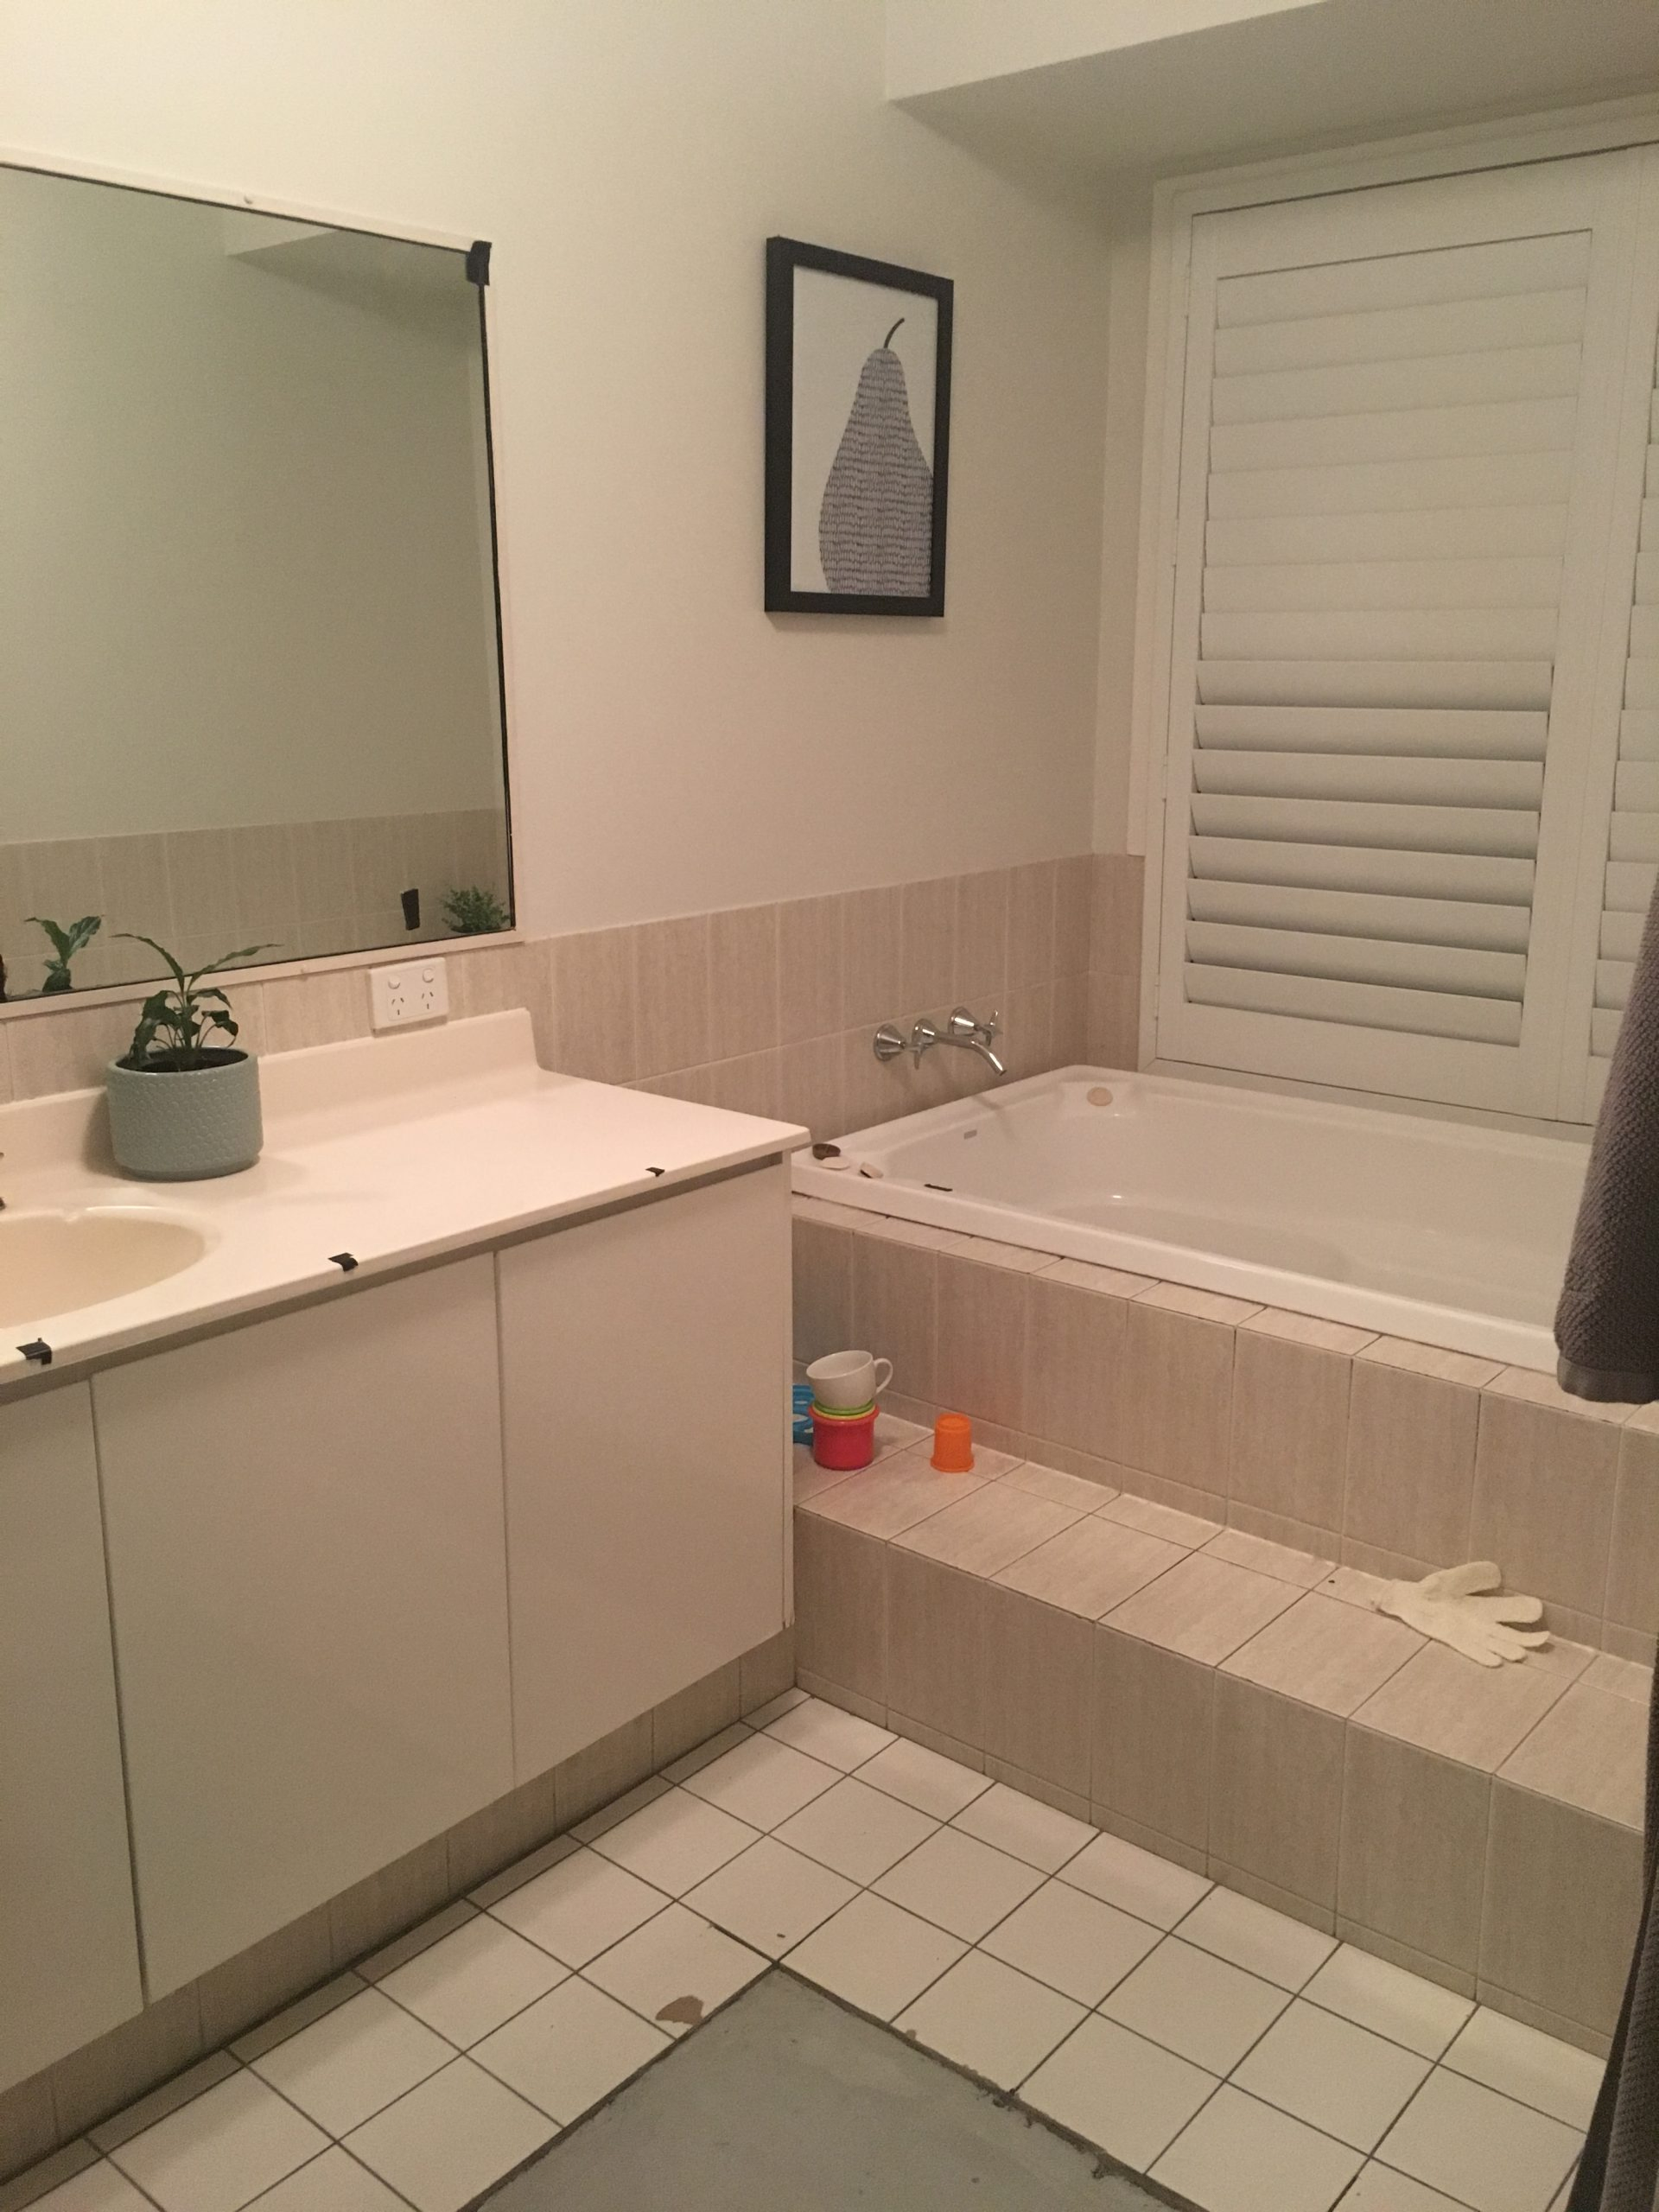 Before photograph of a bathroom renovation